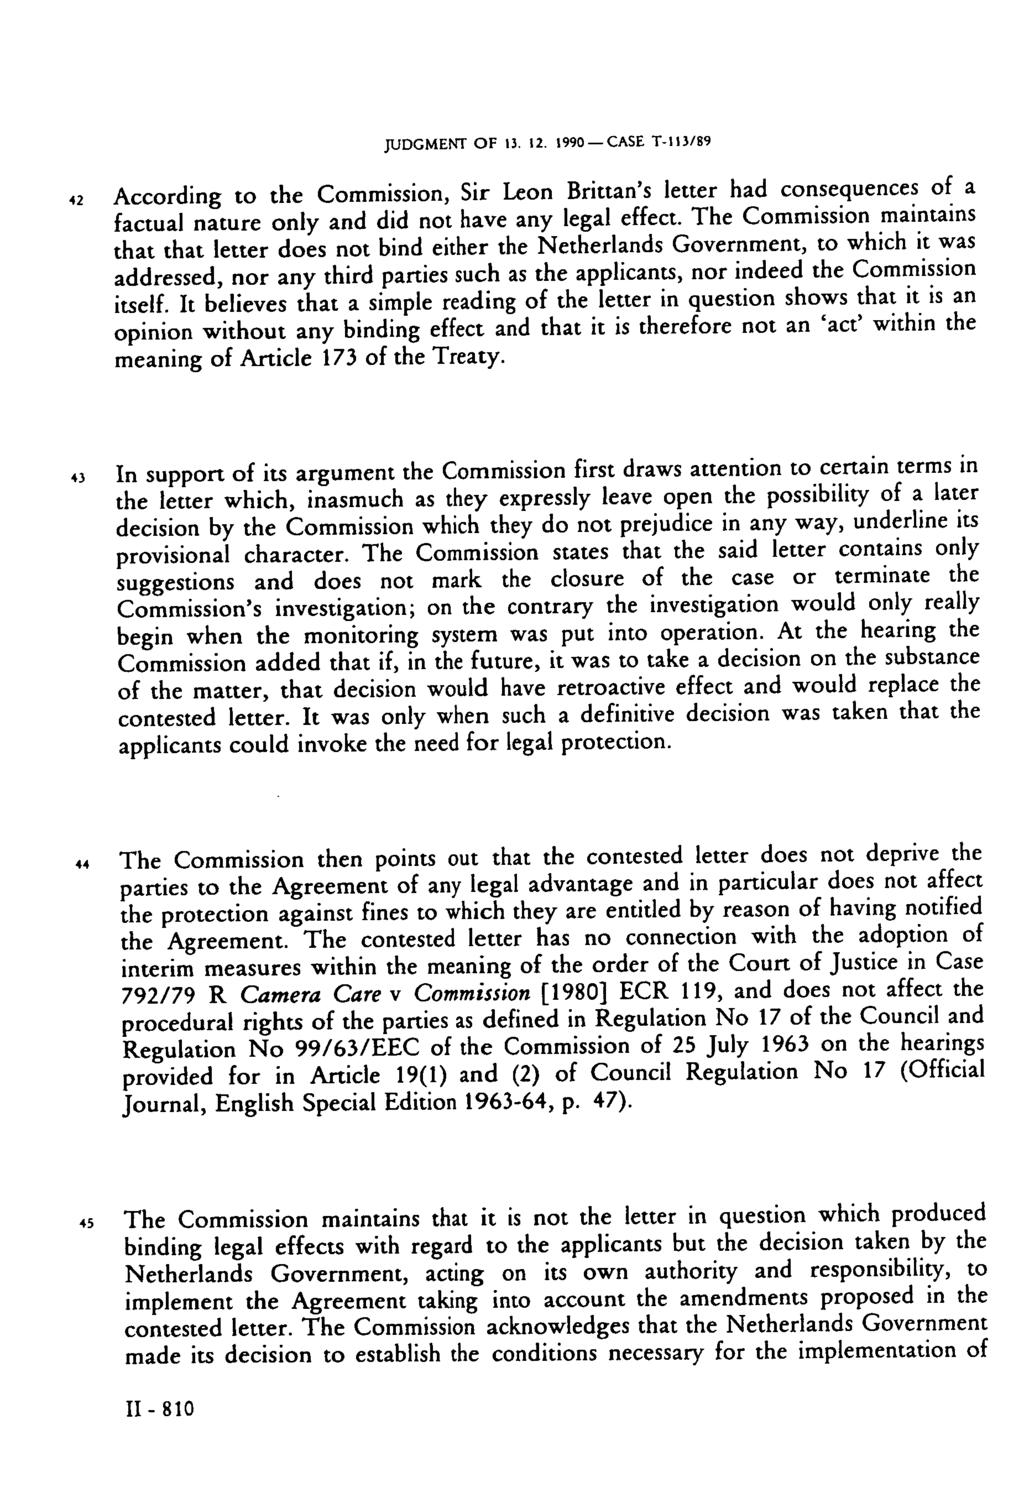 JUDGMENT OF 13. 12. 1990 CASE T-113/89 42 According to the Commission, Sir Leon Brittan's letter had consequences of a factual nature only and did not have any legal effect.